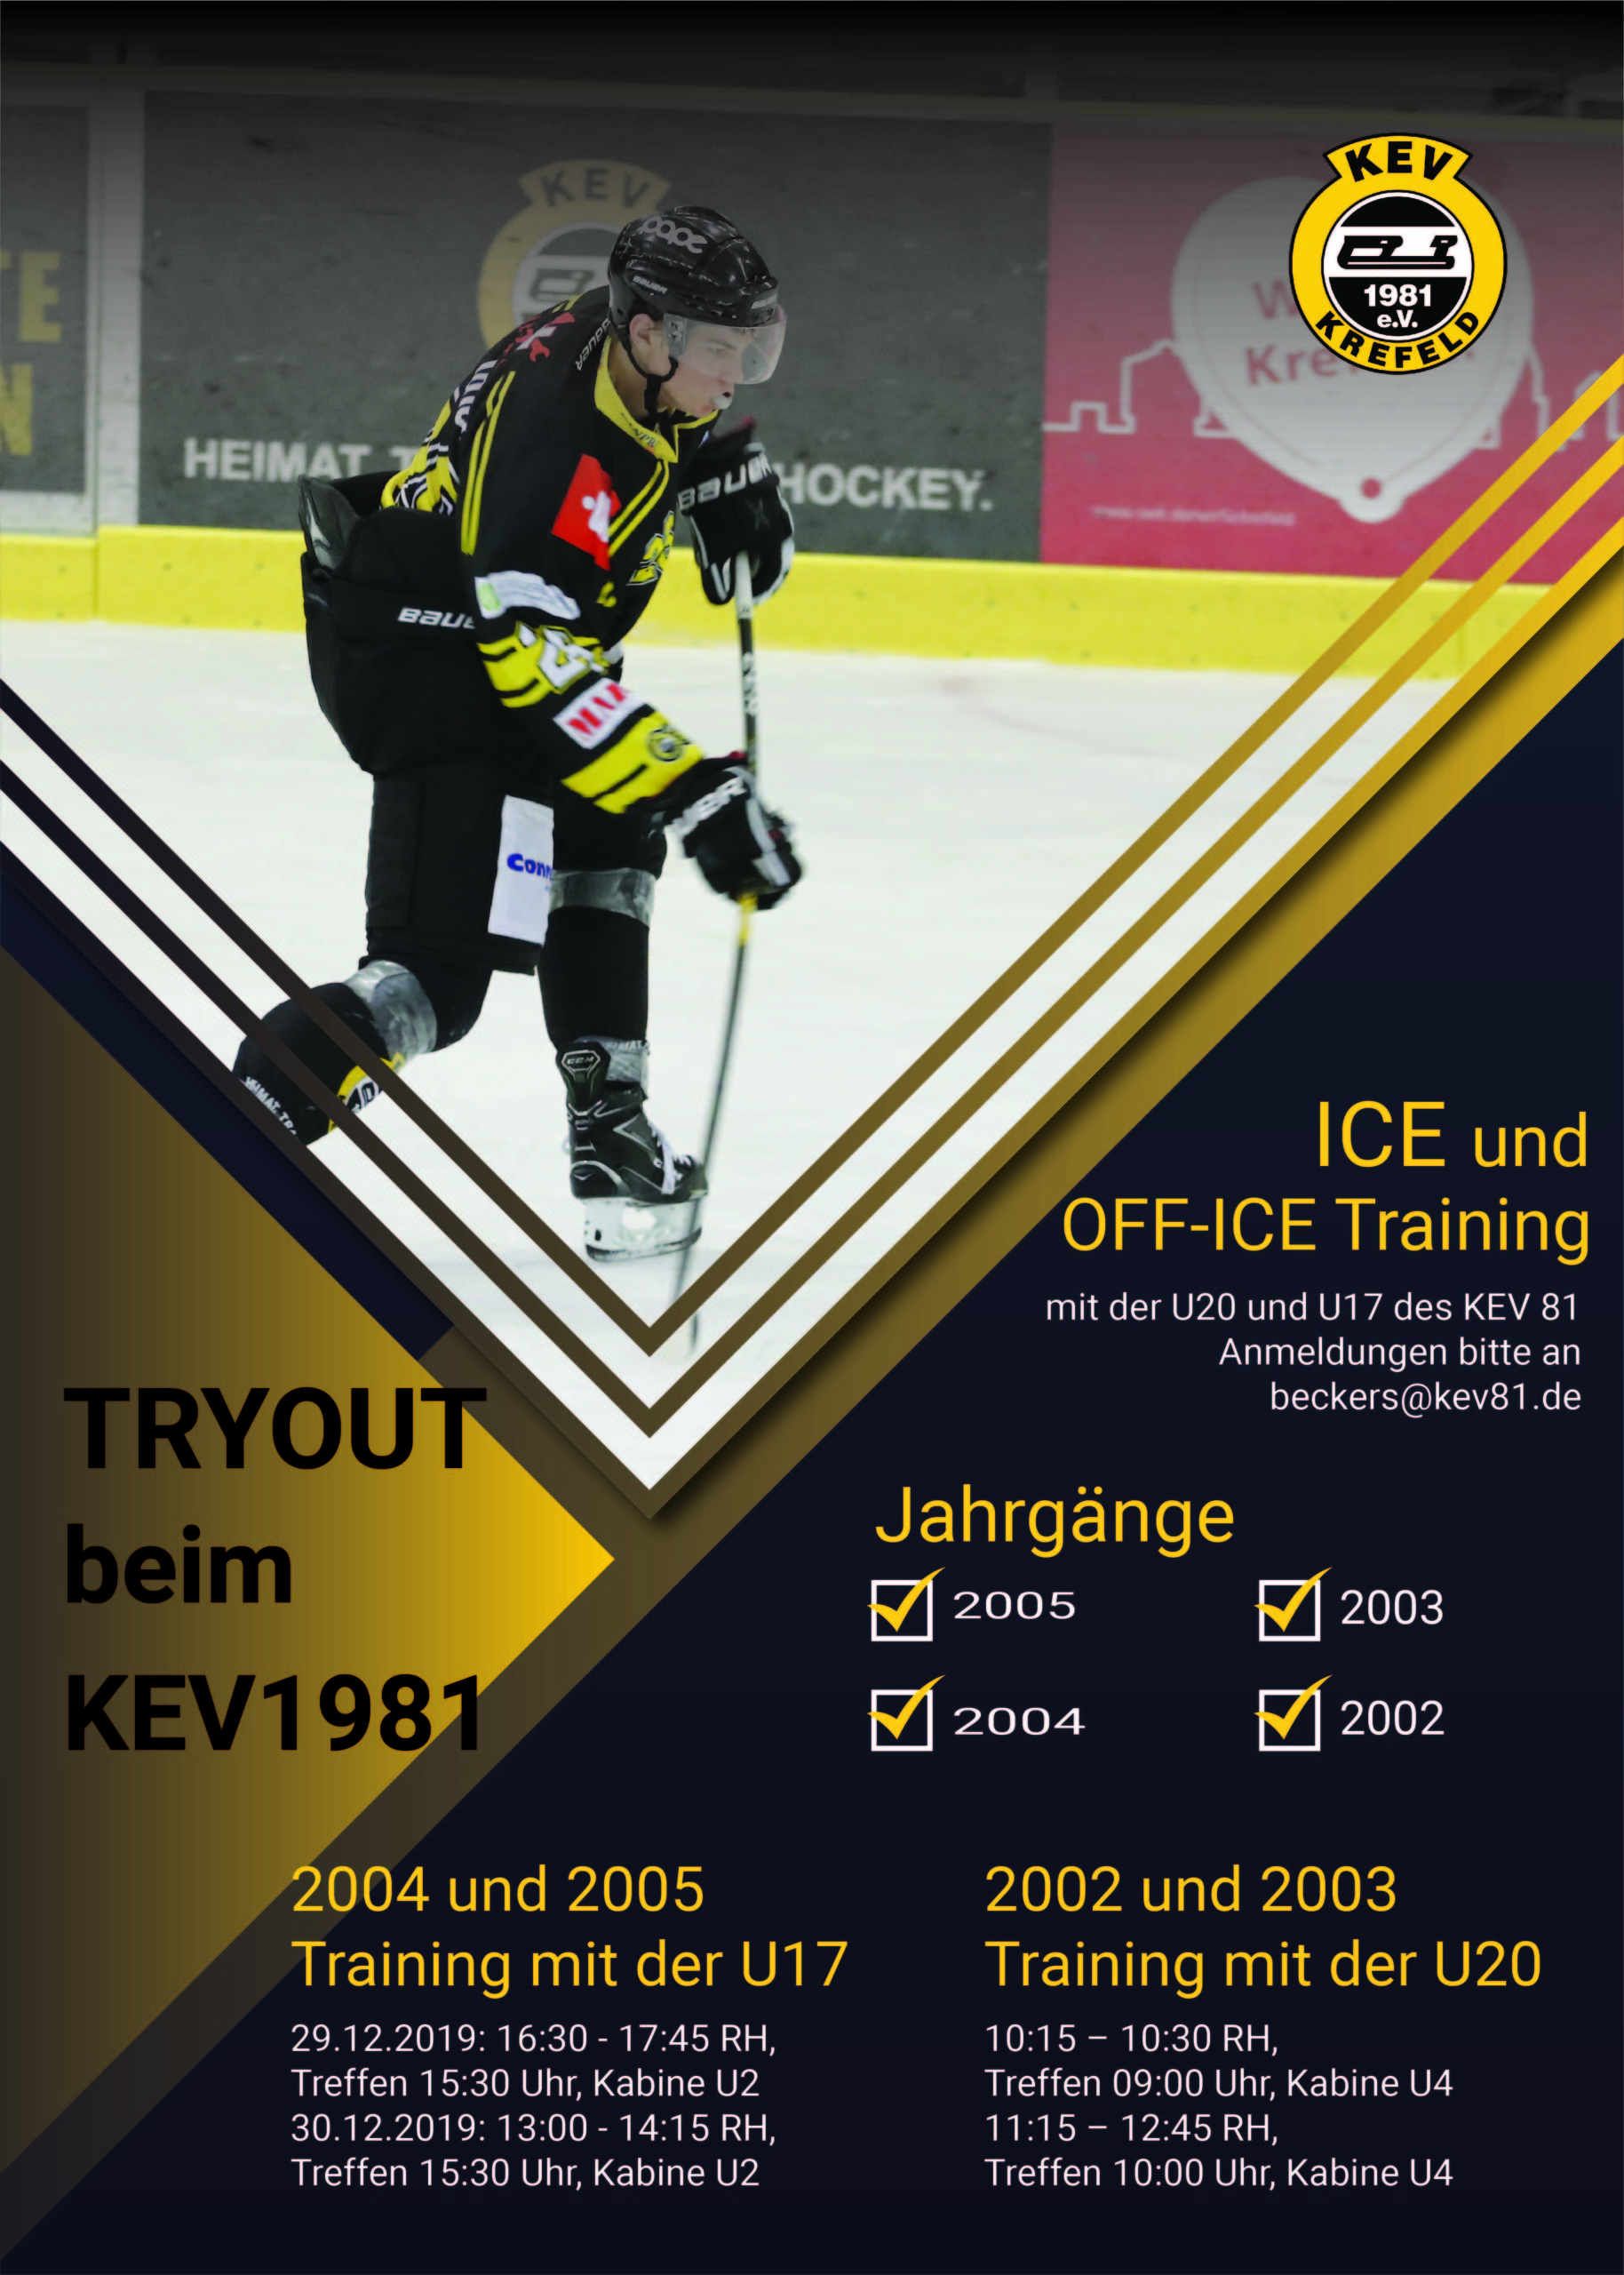 Tryout beim KEV 1981-01